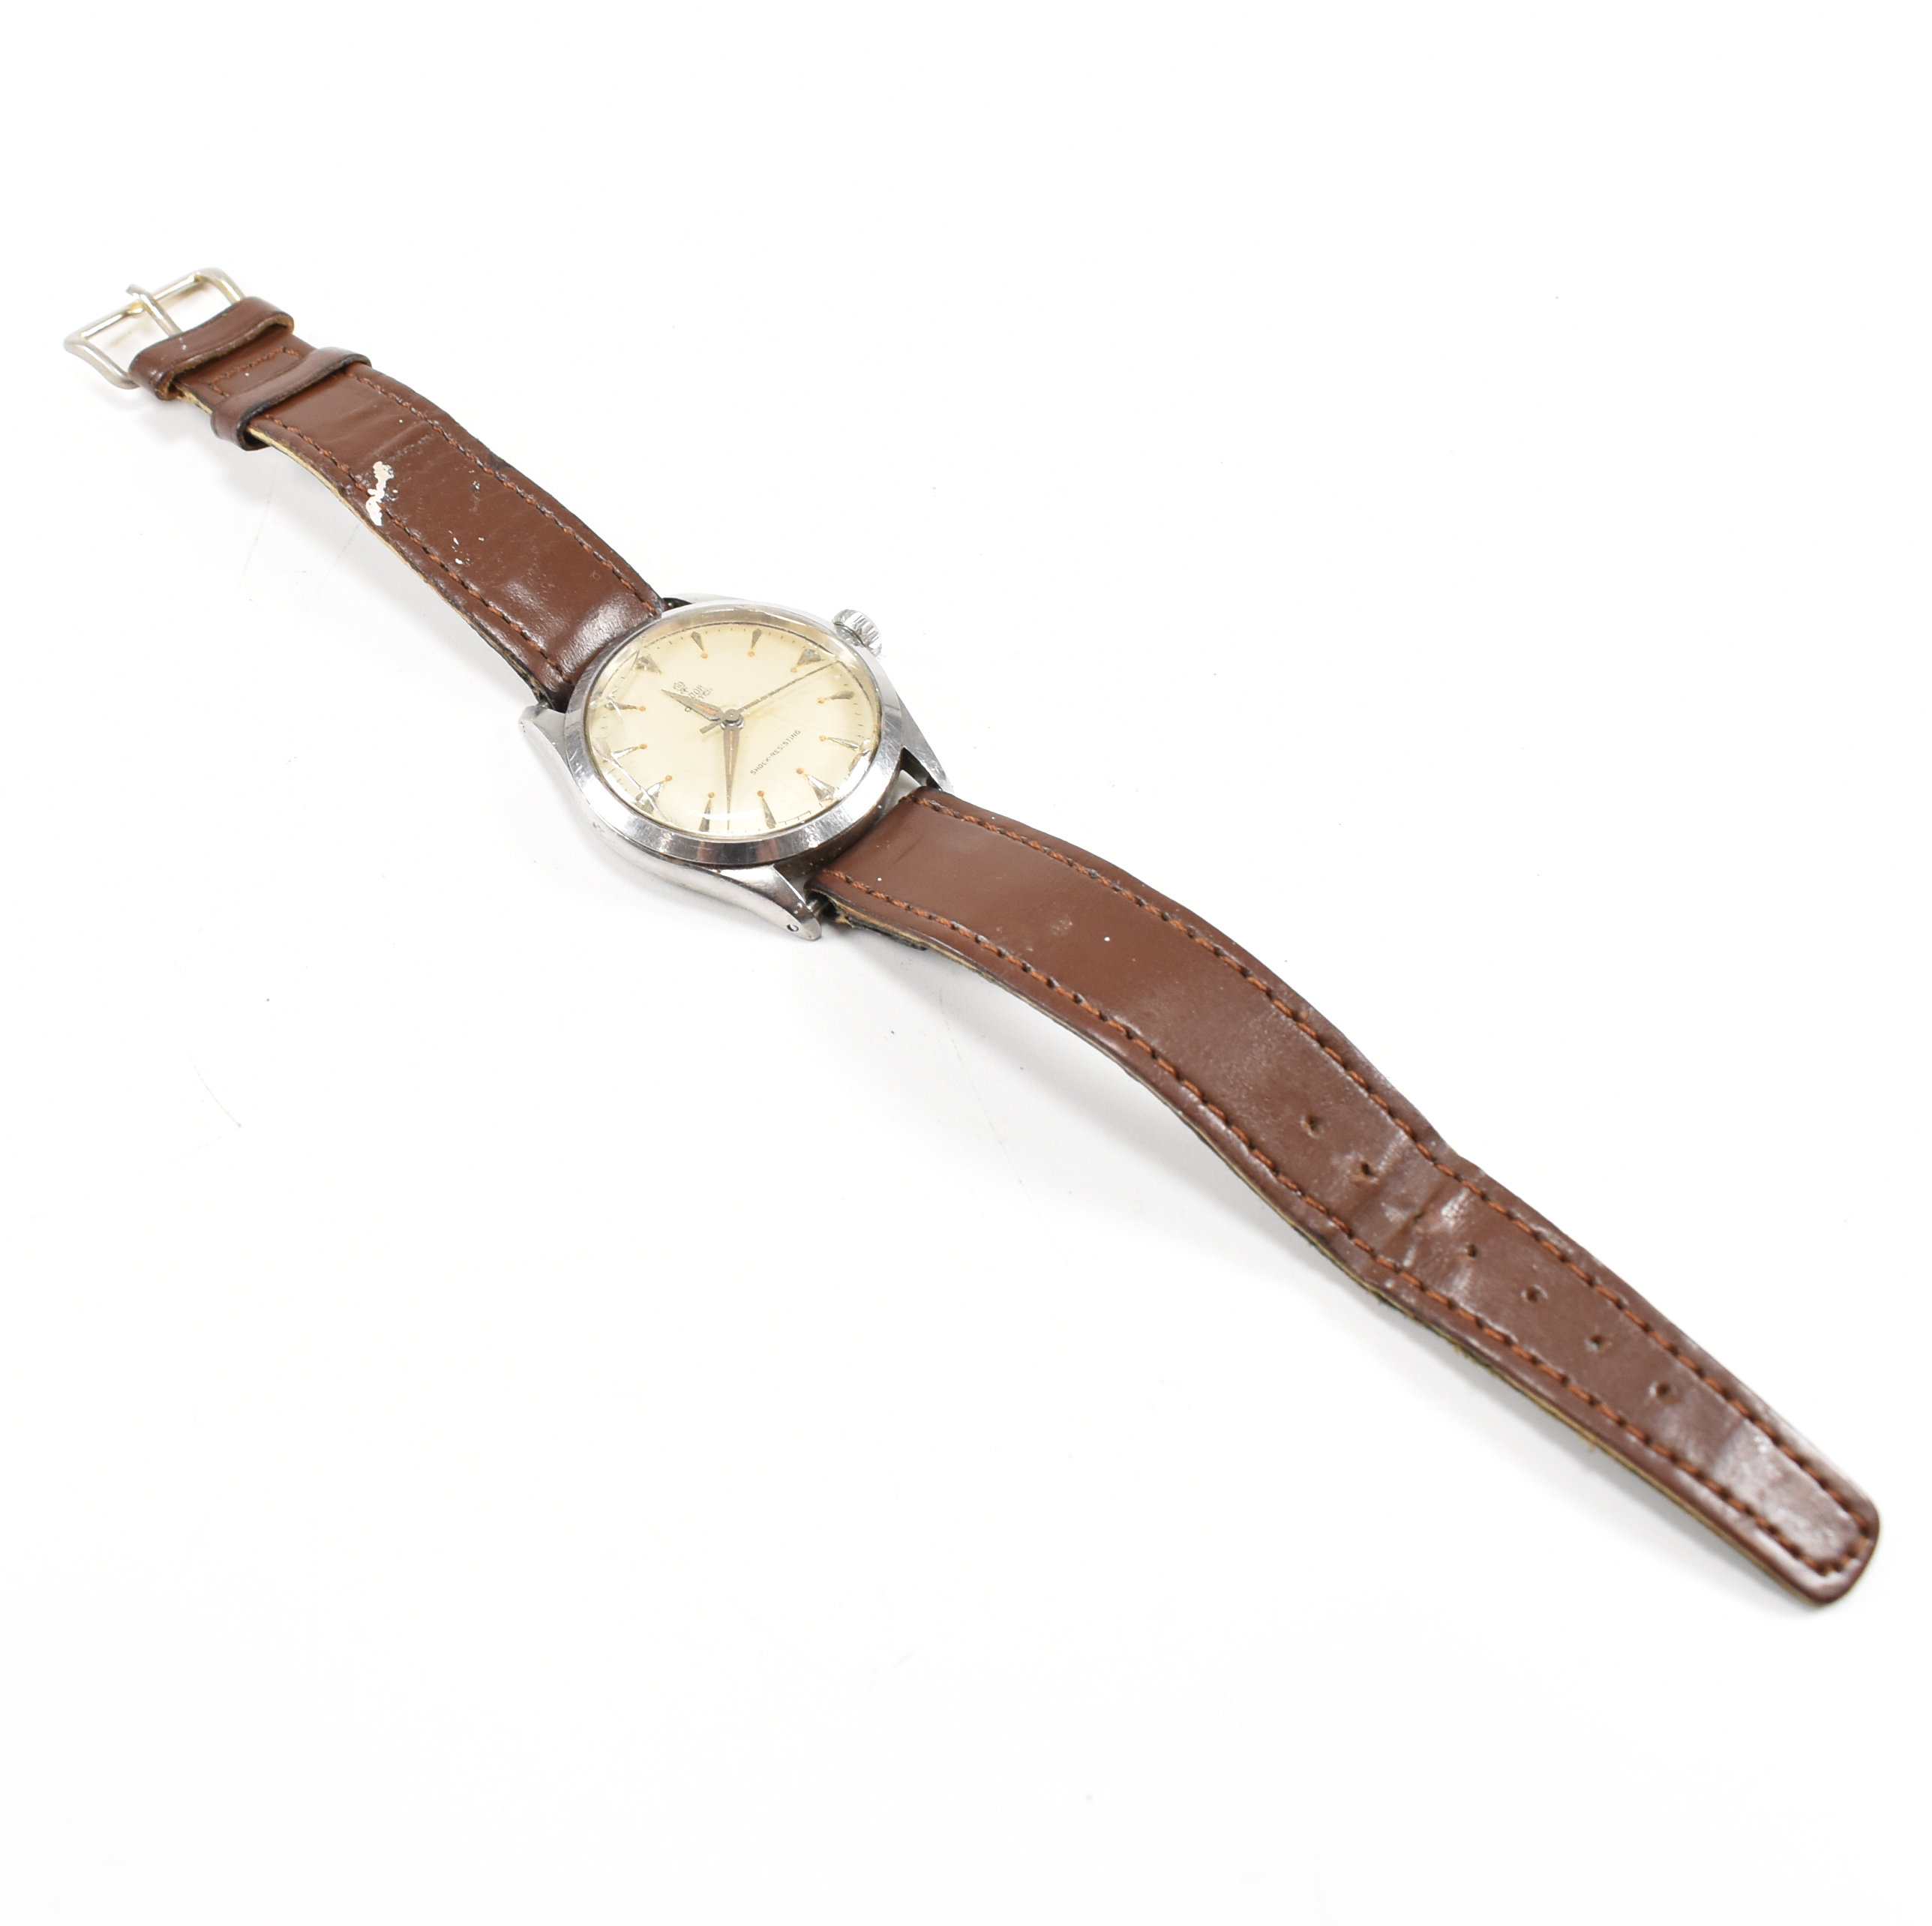 MID CENTURY TUDOR OYSTER STAINLESS STEEL WRISTWATCH - Image 5 of 7